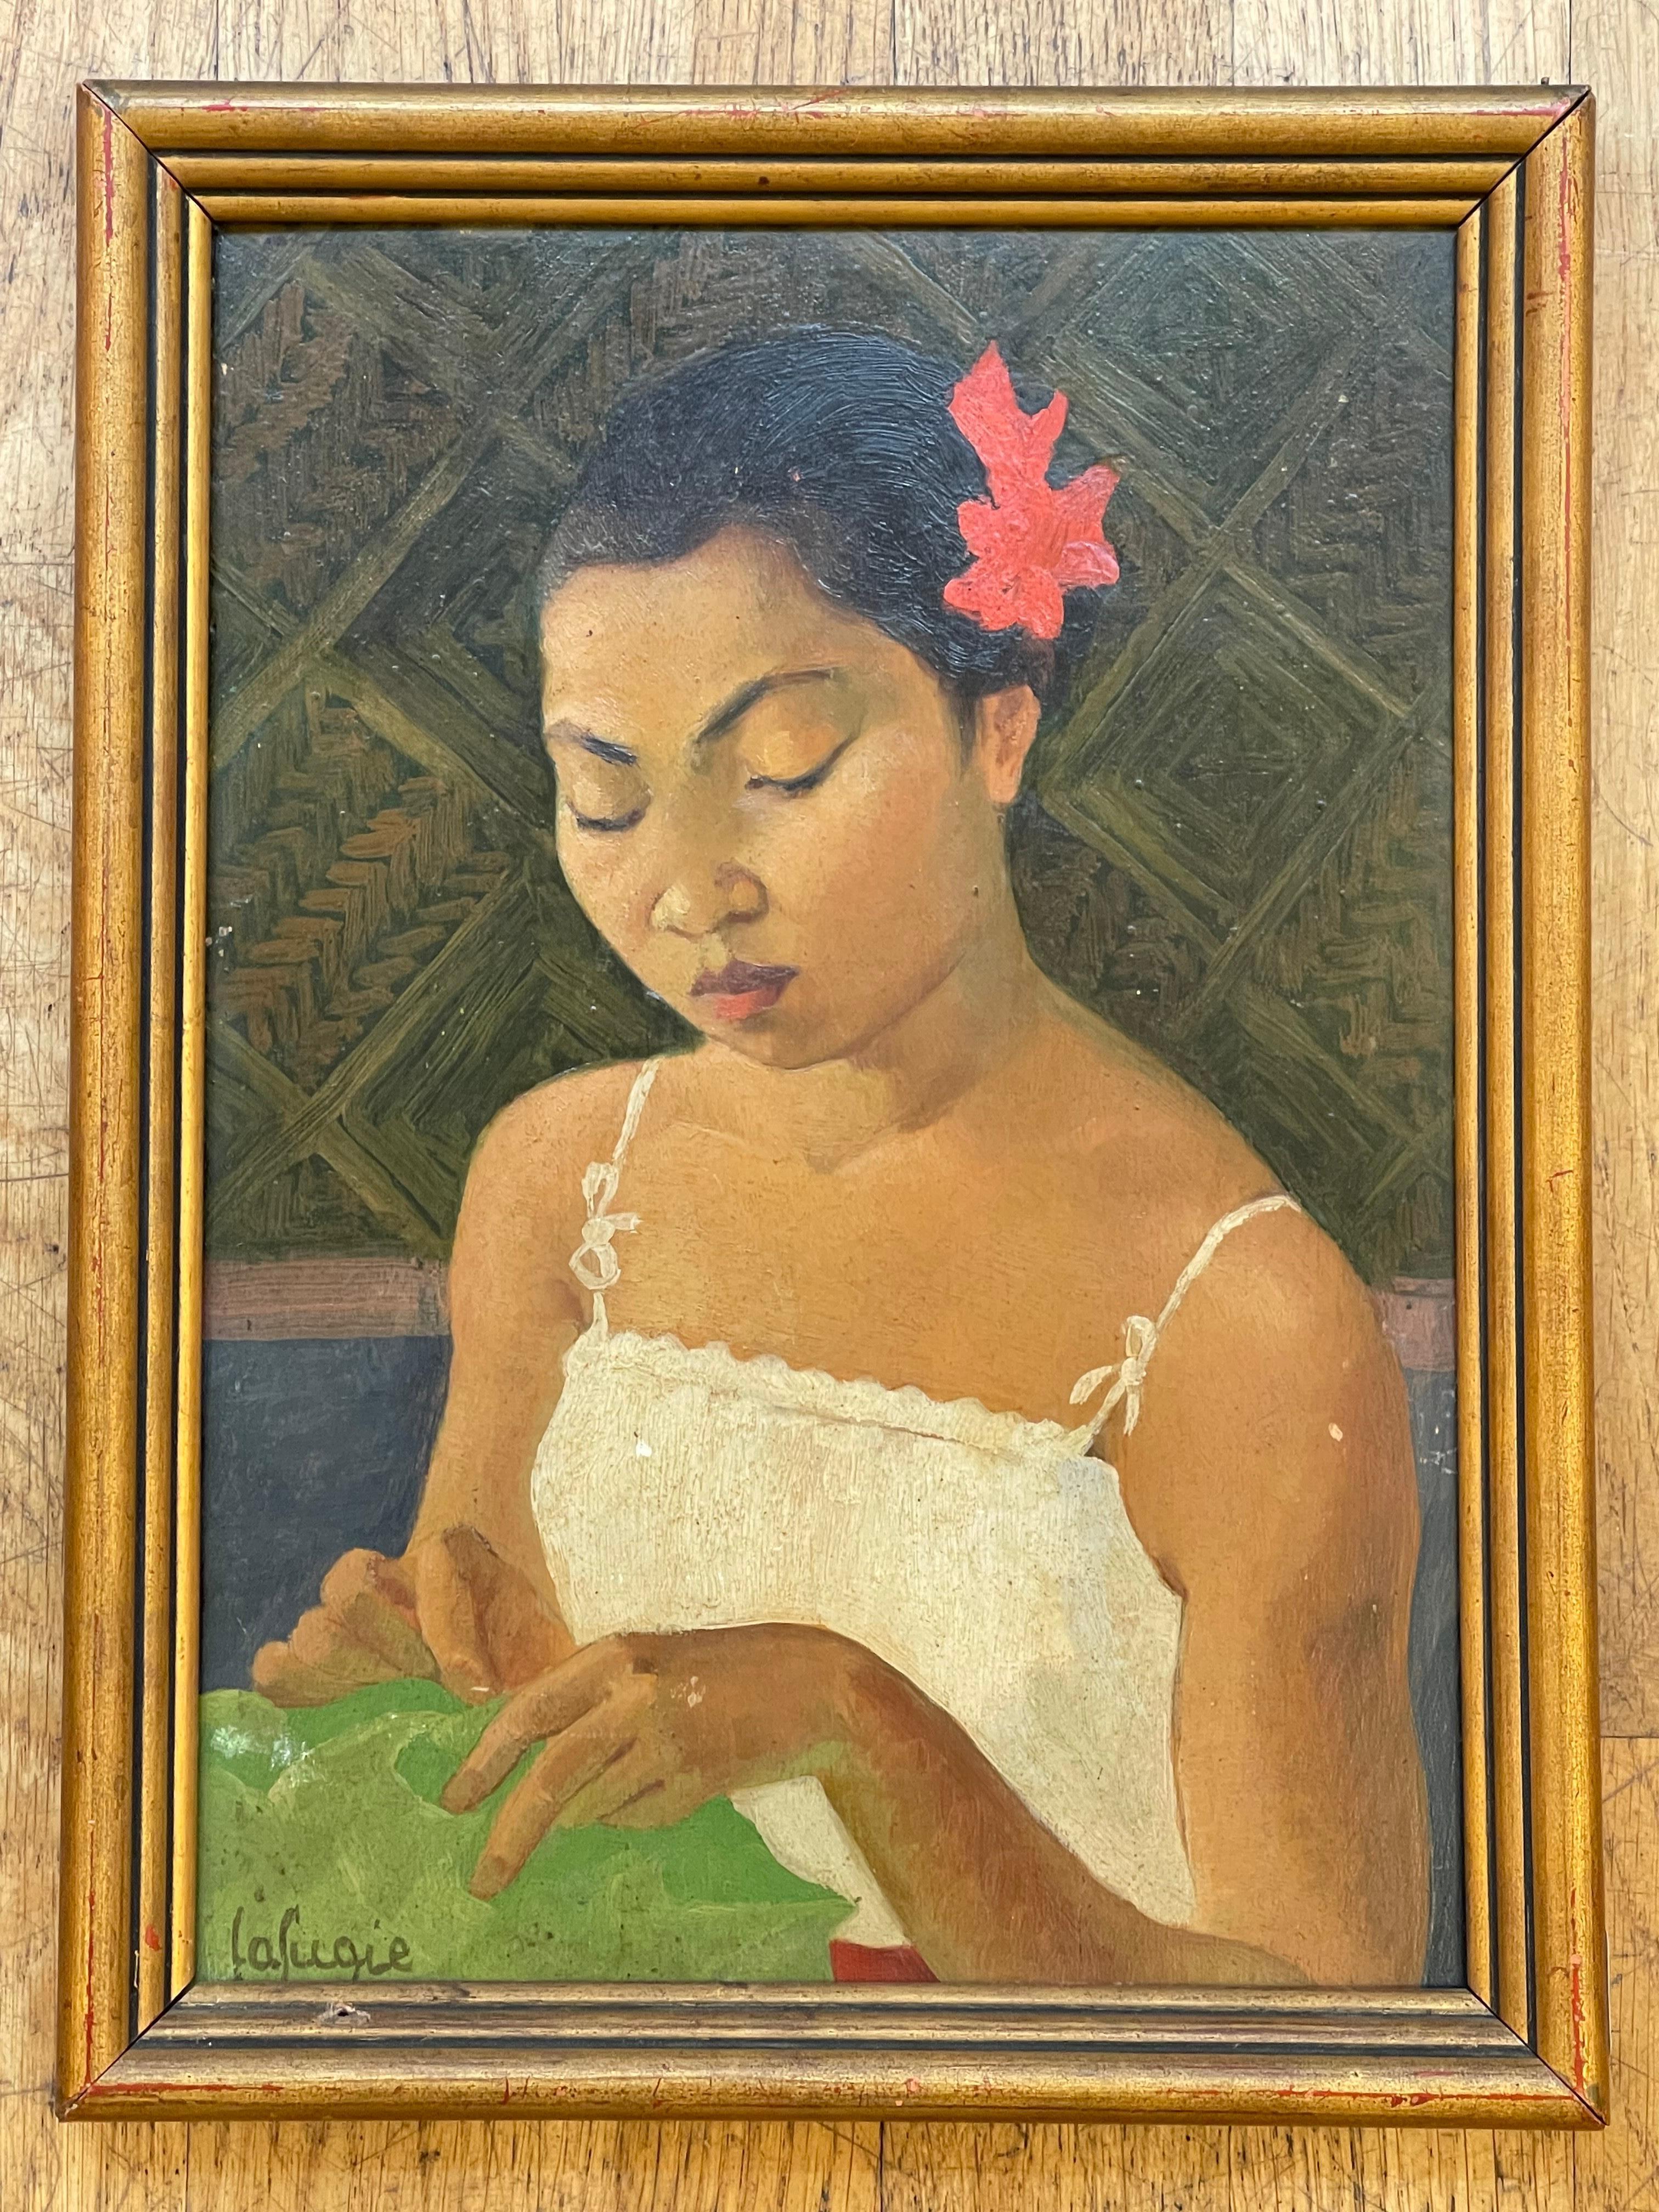 
Splendid  Portrait of a Young Cambodian Girl, by Léa LAFUGIE (1890-1972),oil on panel, 33 x 23.5 cm

Léa Lafugie was a French painter born in Paris, known for her portraits and landscapes inspired by her travels. She studied at the National School